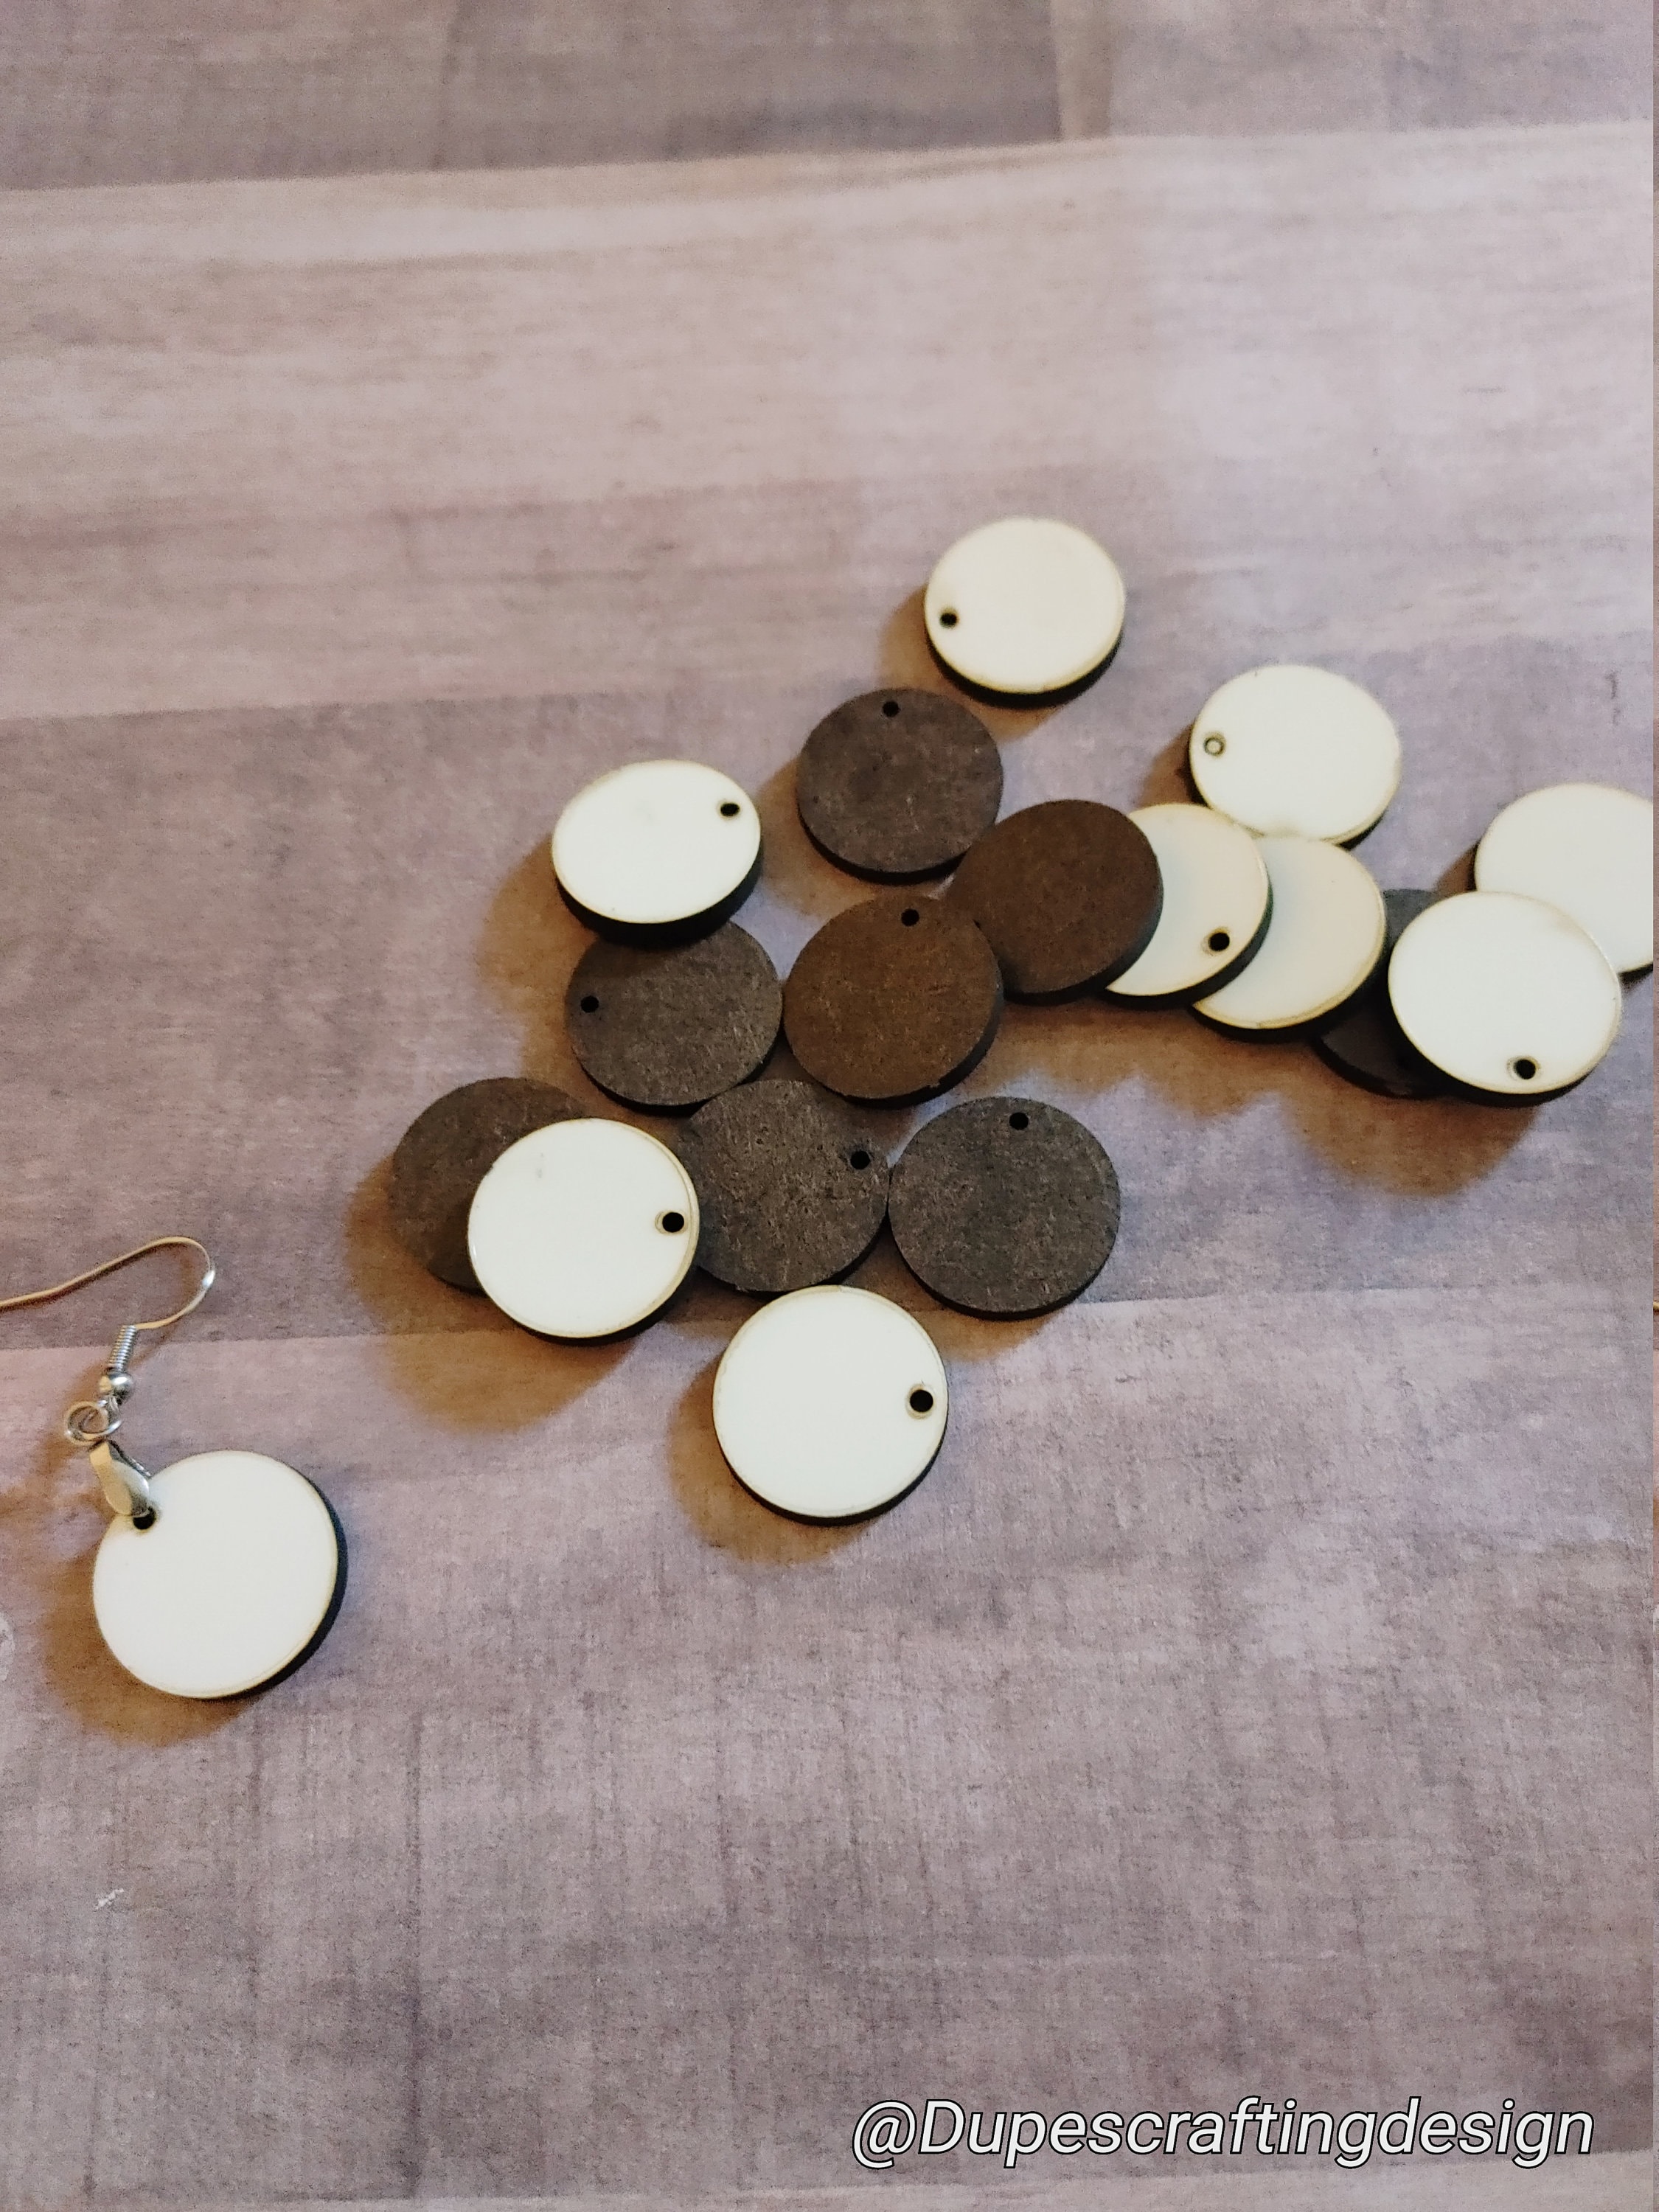  100PCS Natural Wooden Craft Rings 70mm/2.75inch Unfinished Wood  Loop Circle Pendant Connectors Jewelry Making Accessory